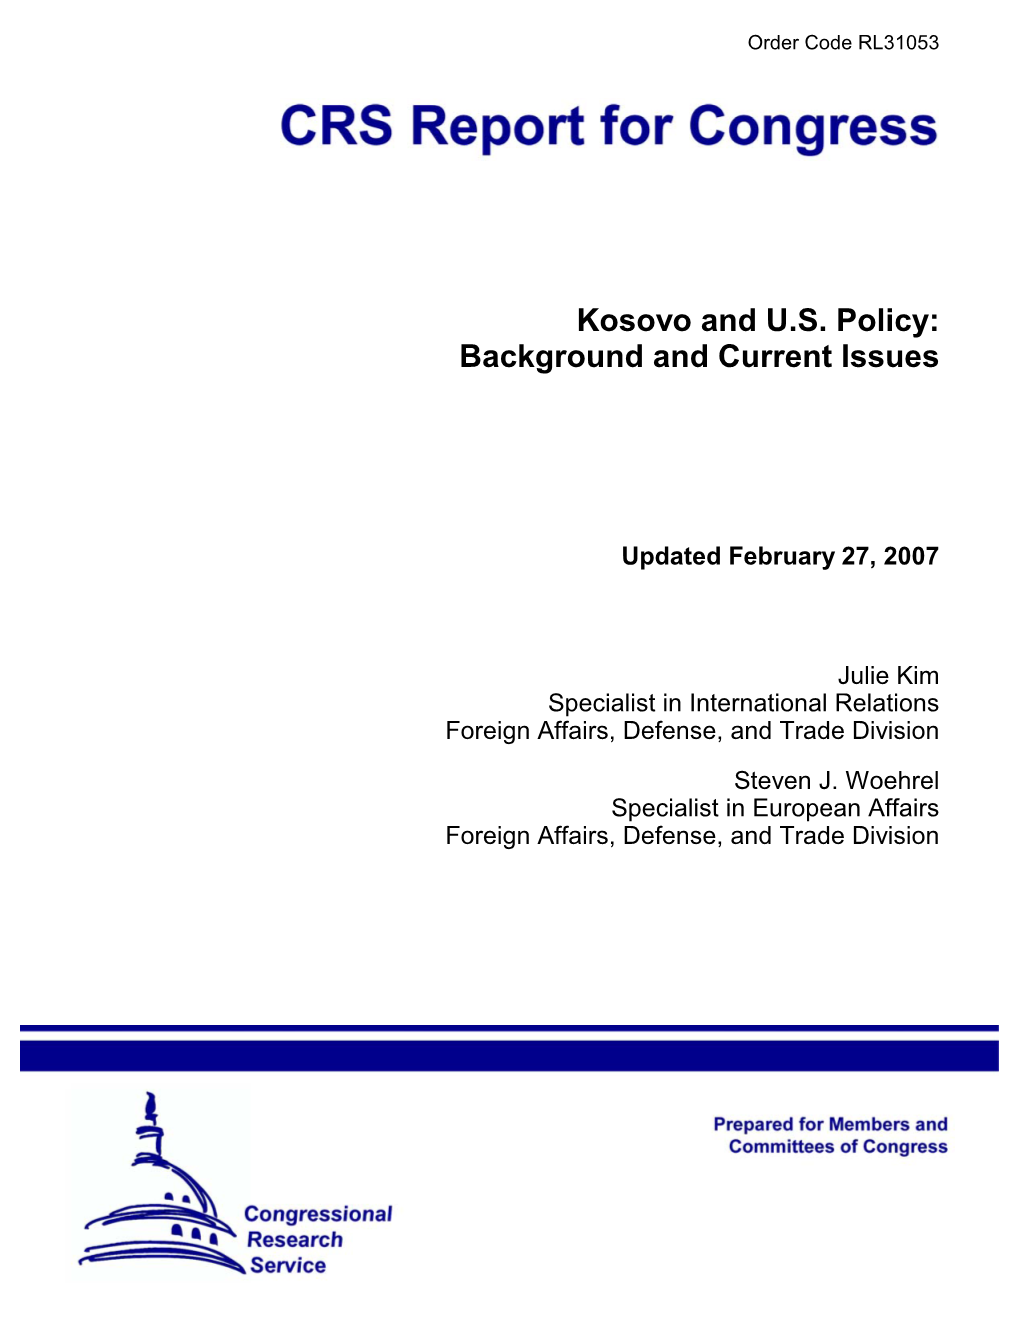 Kosovo and US Policy: Background and Current Issues